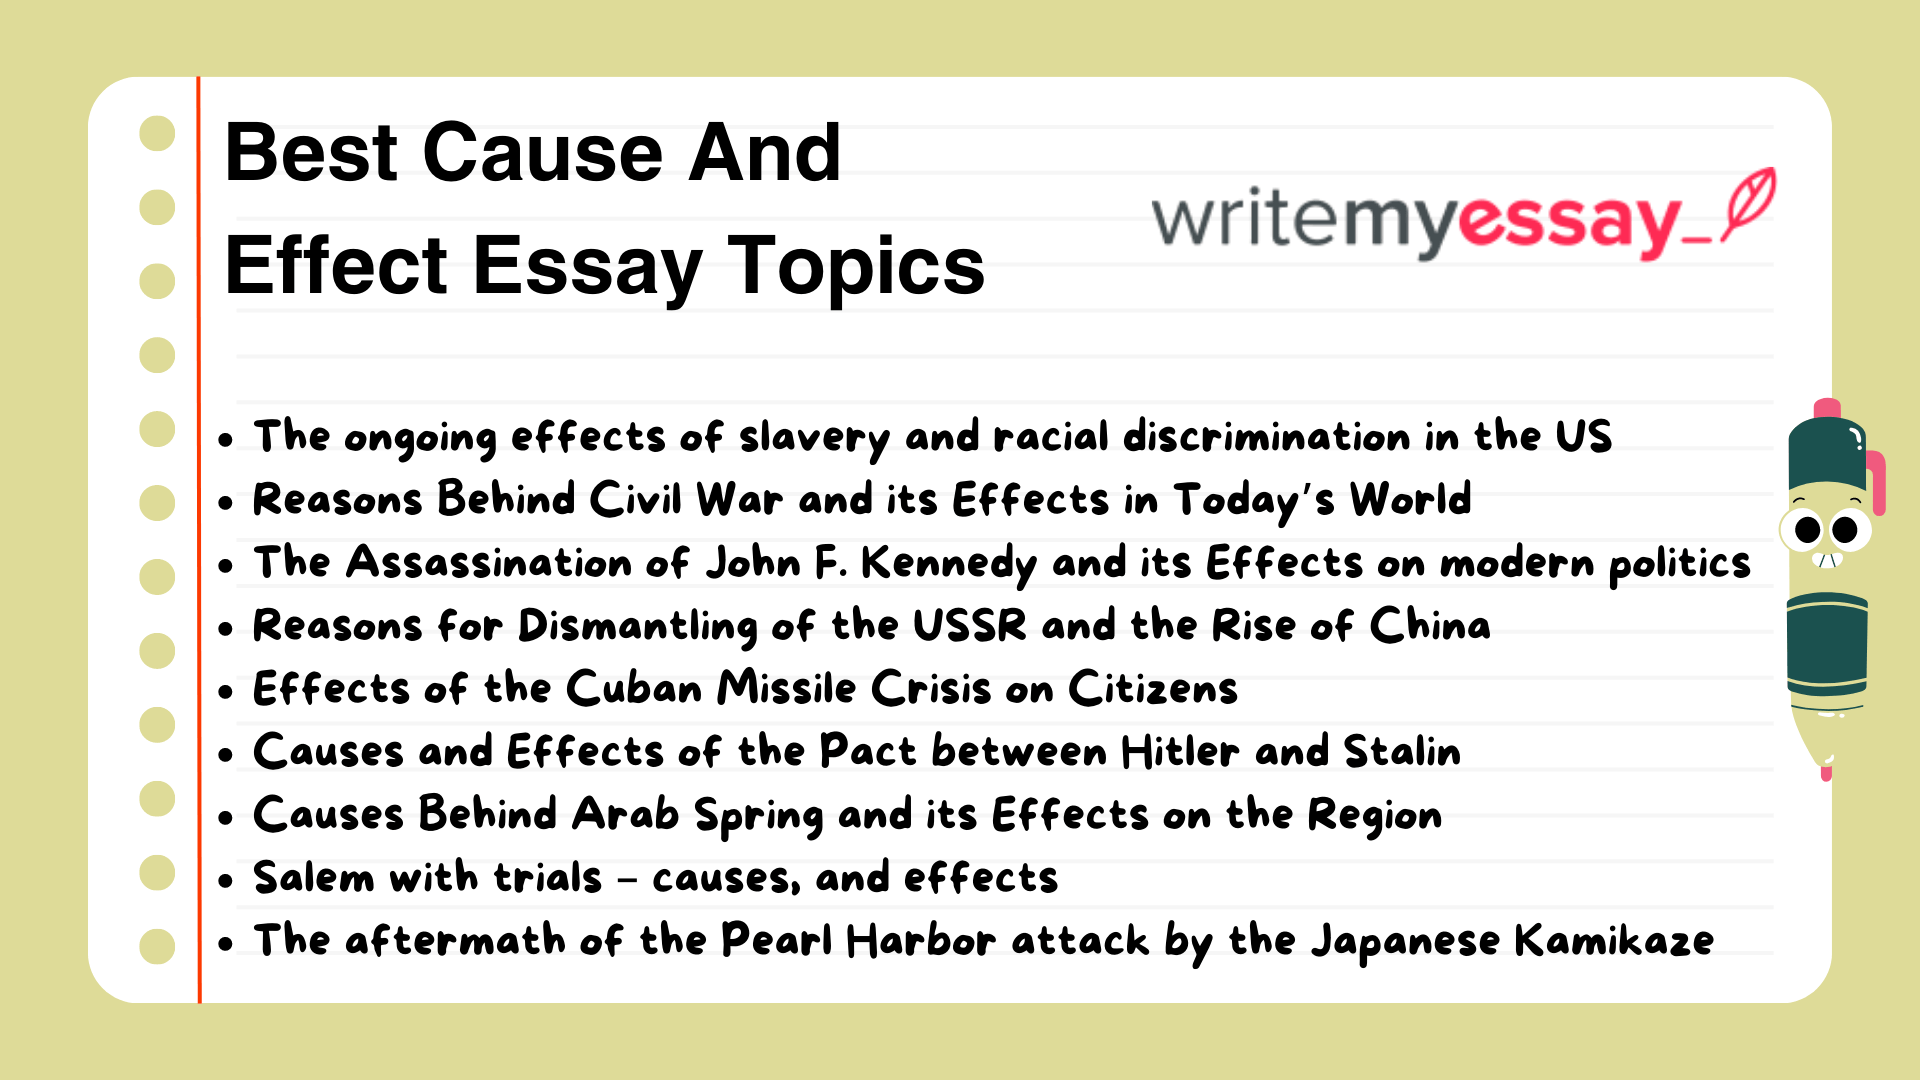 Best Cause And Effect Essay Topics